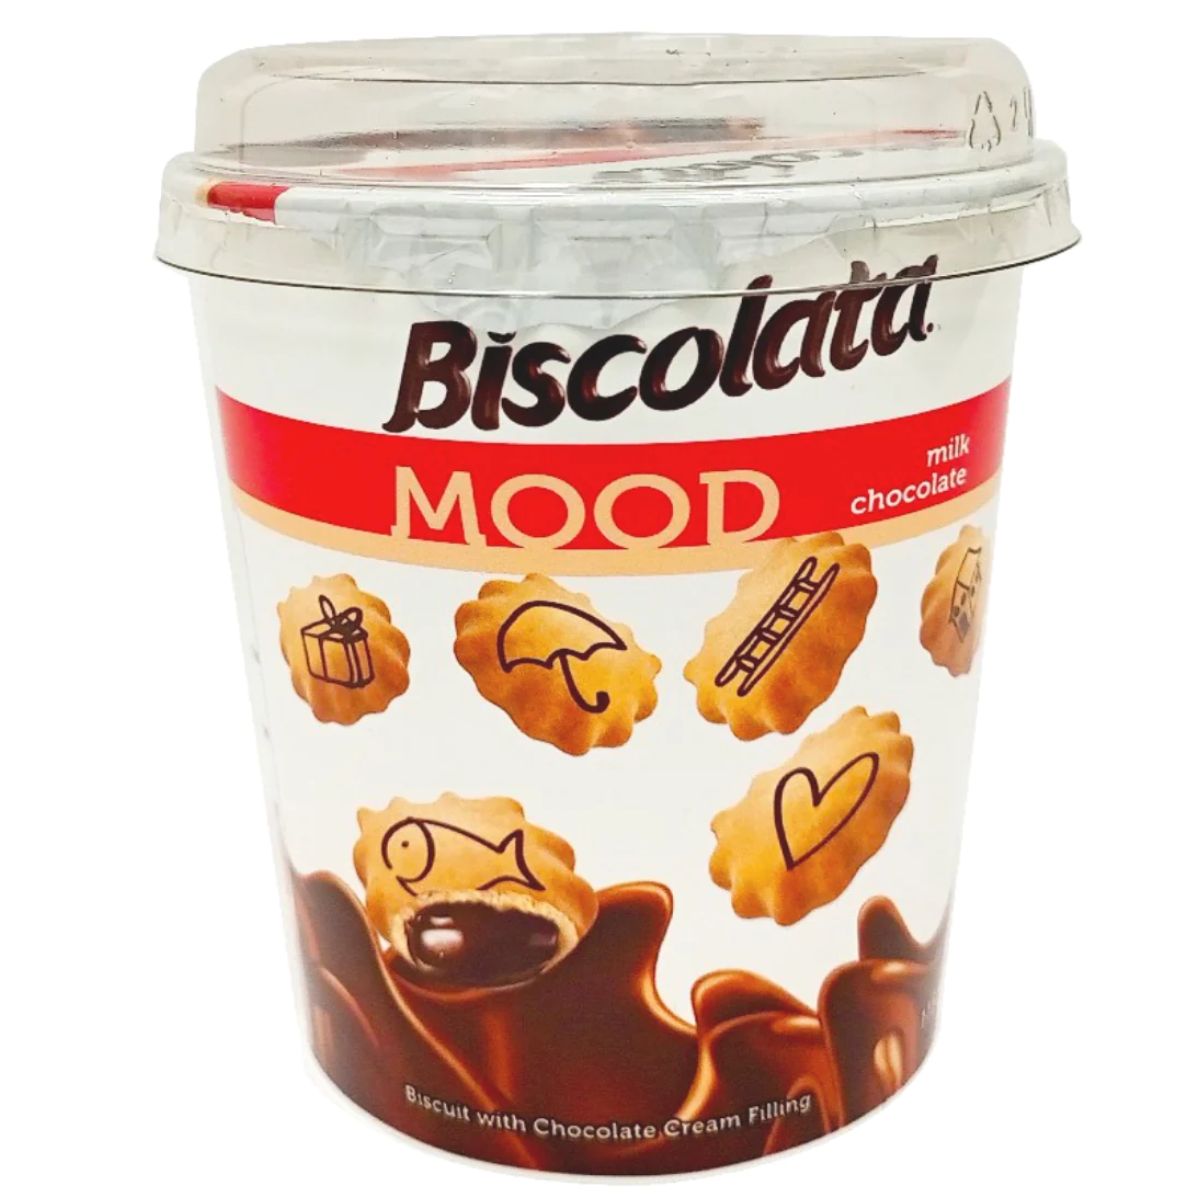 A bucket of Biscolata - Mini Biscuit with Milk Chocolate and Hazelnut - 100g on a white background.